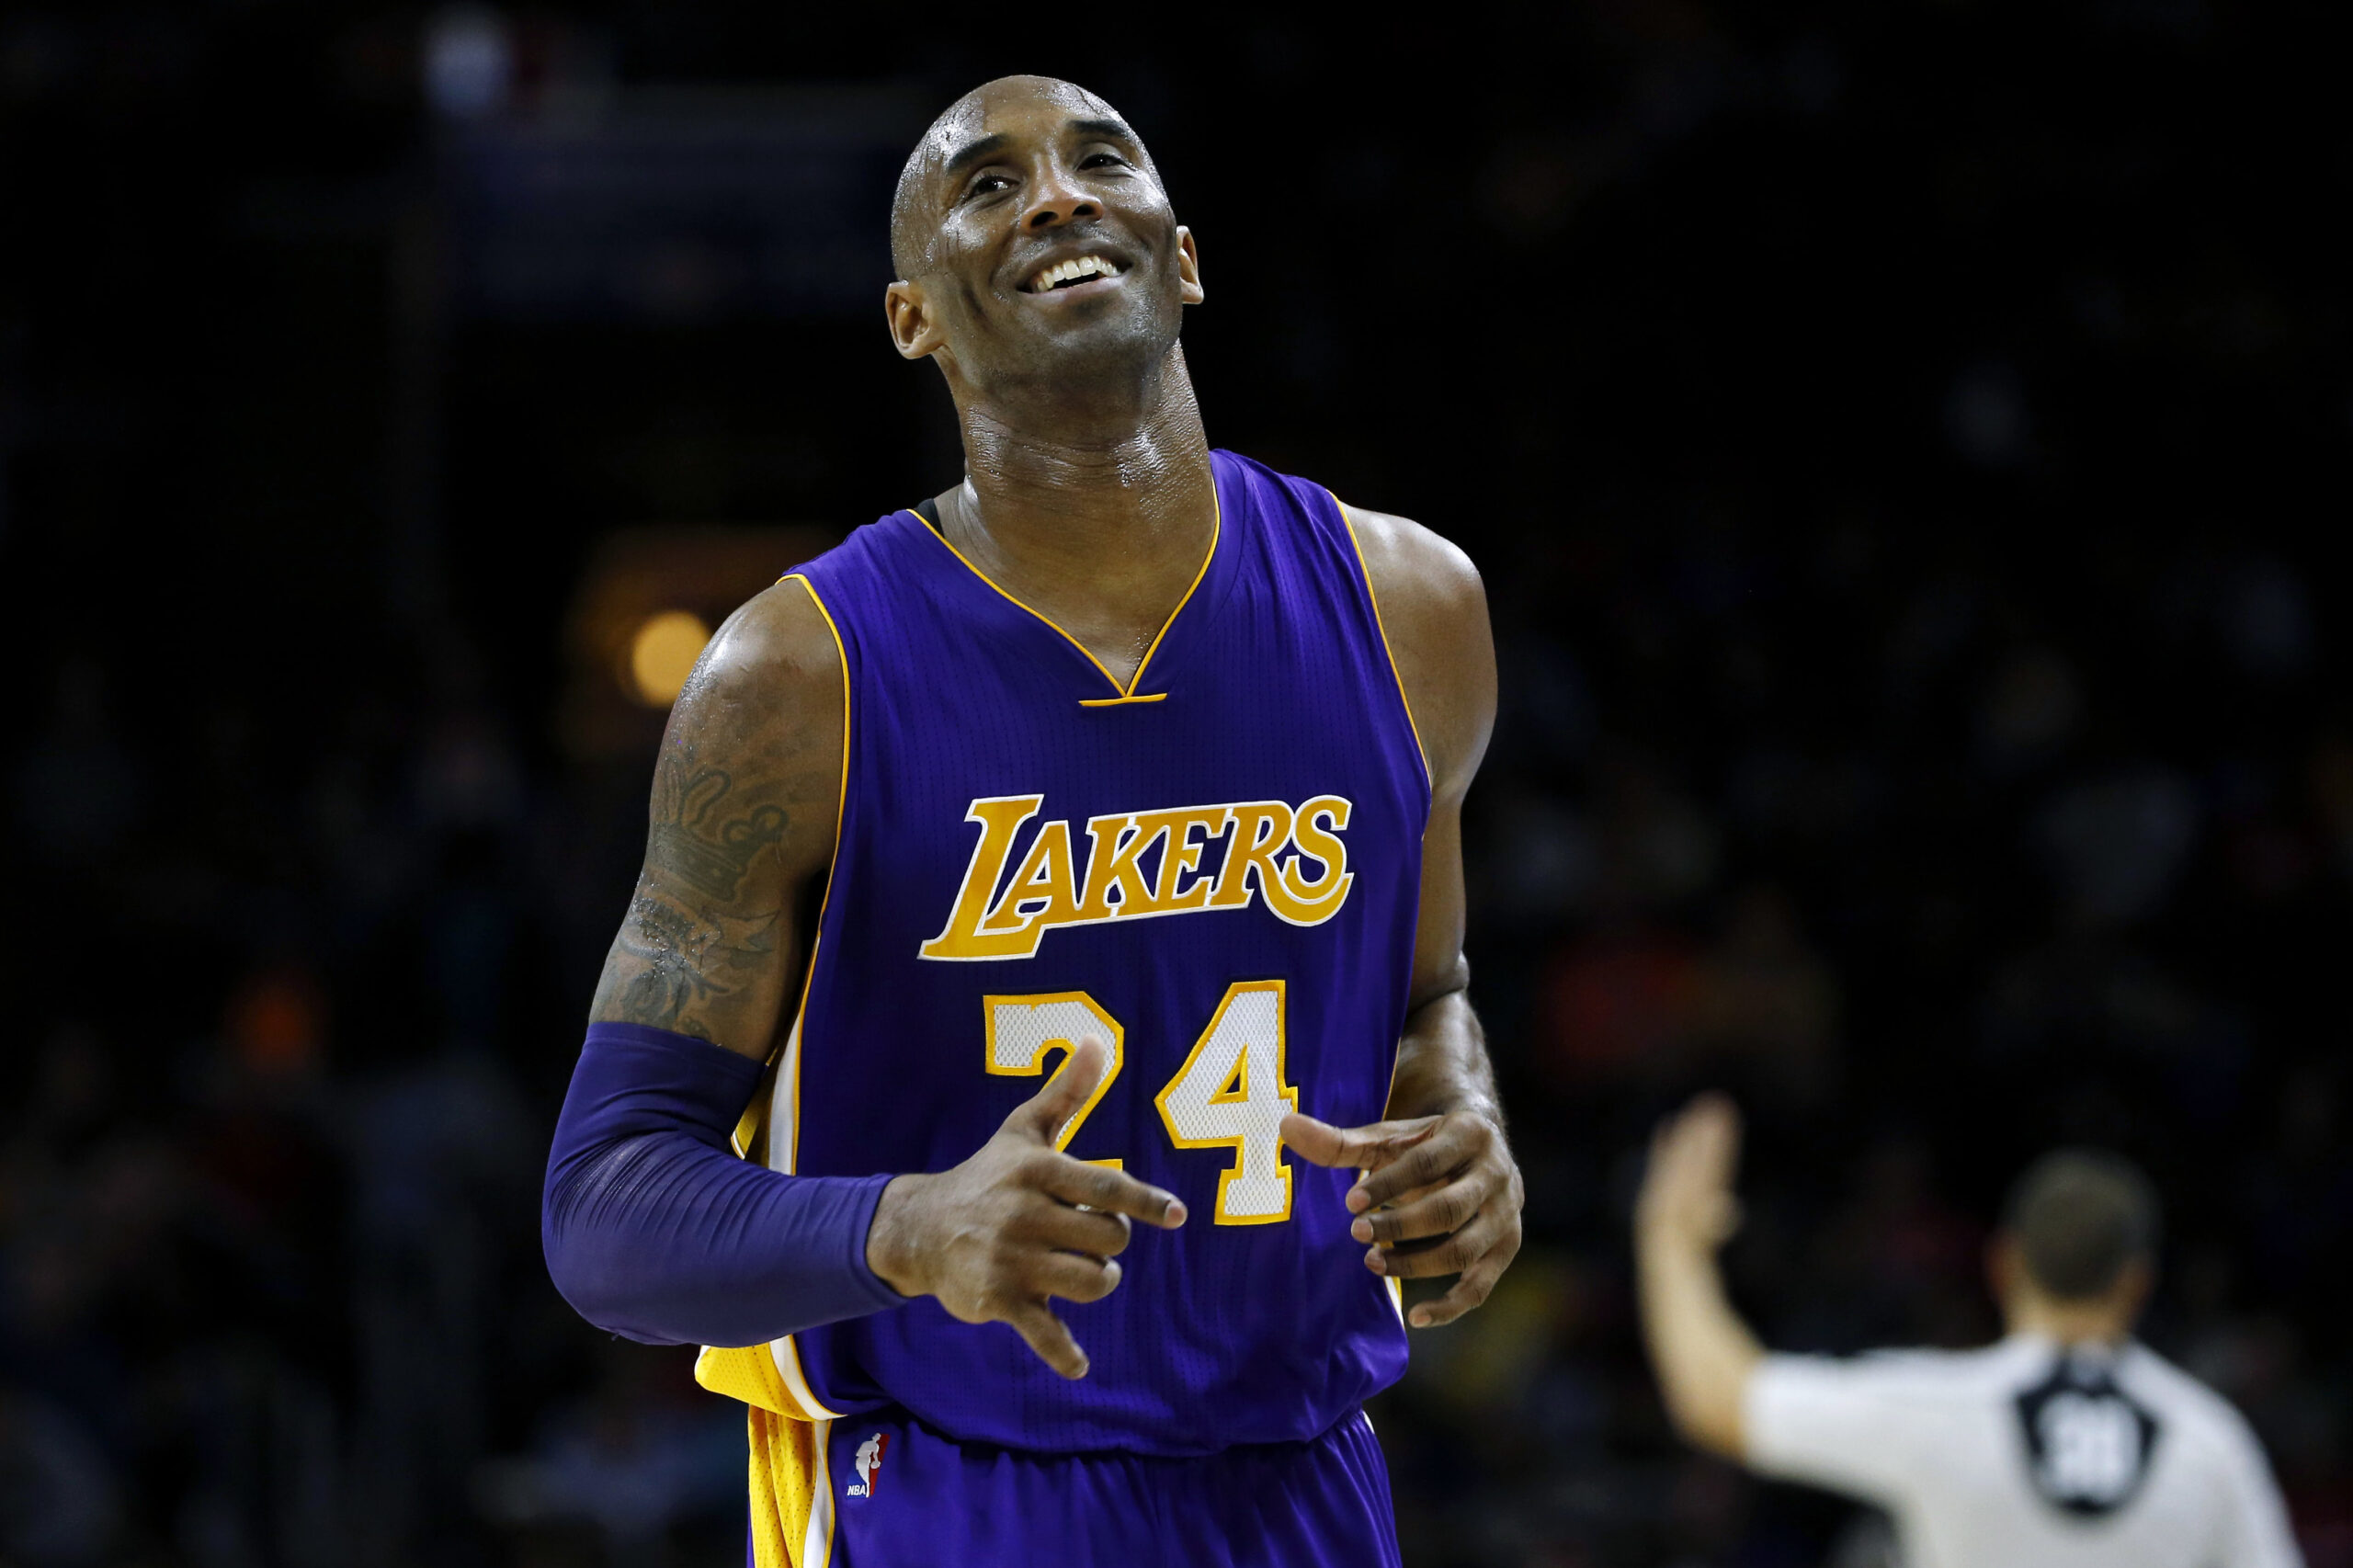 Rudy Tomjanovich reacts to death of his former player, Kobe Bryant